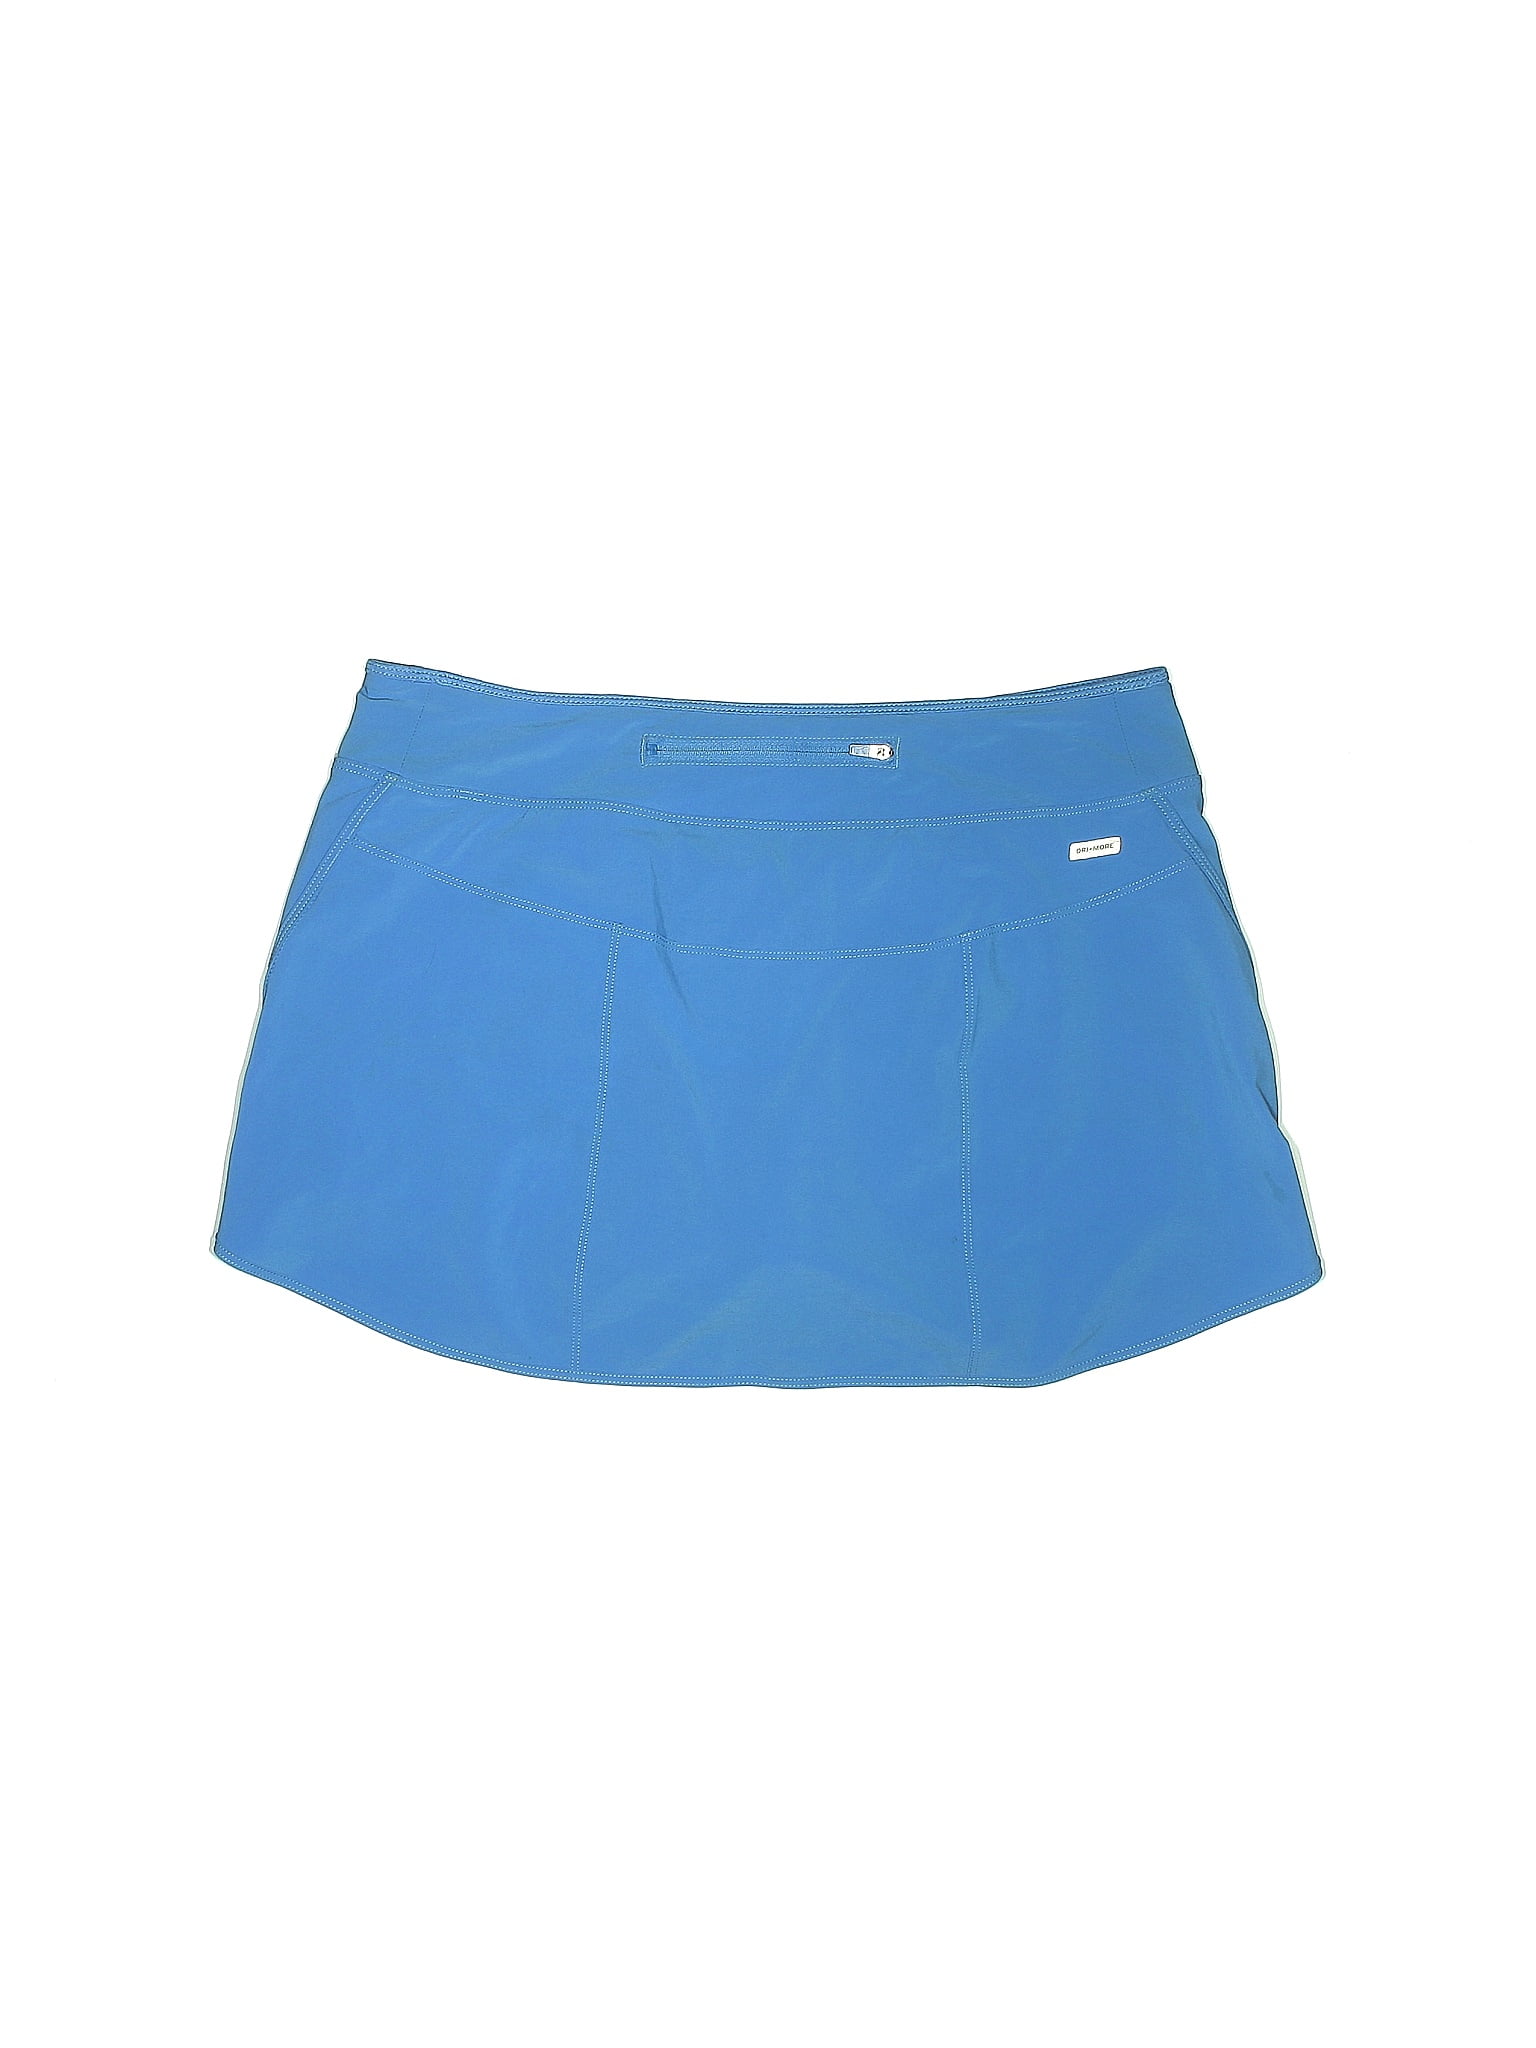 Danskin Now Women's Shorts And Skirts Activewear On Sale Up To 90% Off  Retail